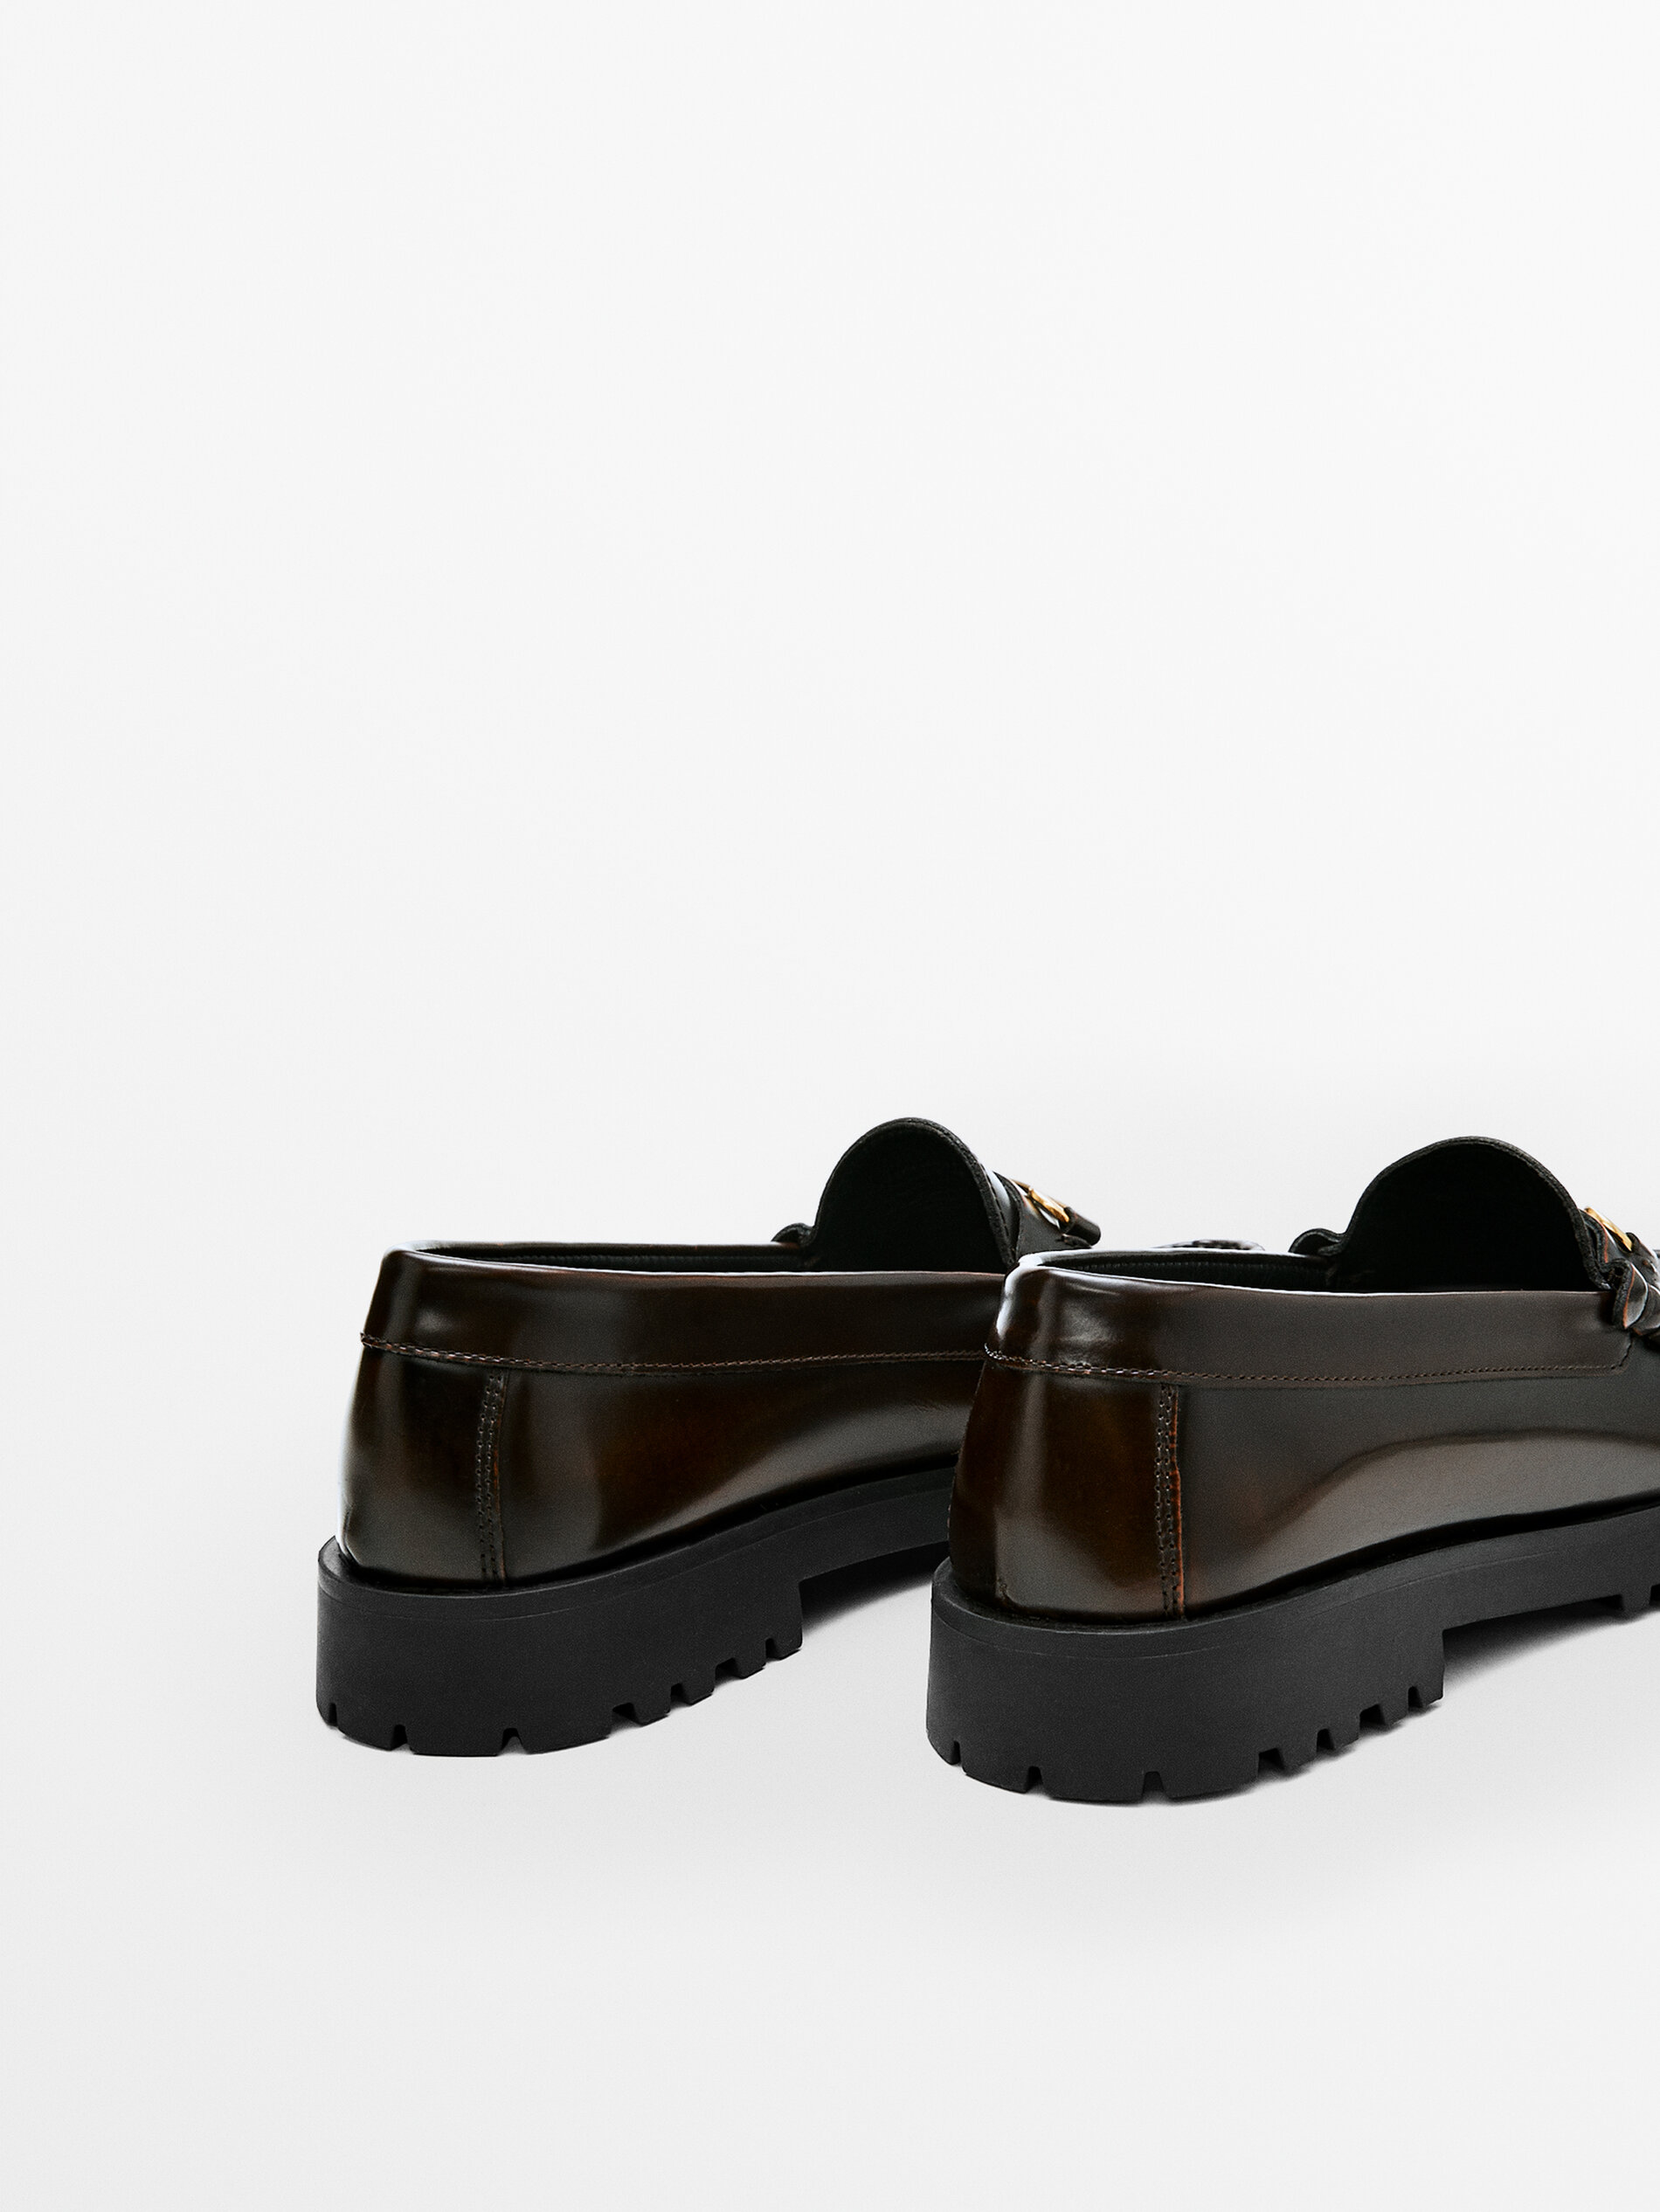 BROWN LEATHER LOAFERS WITH TRACK SOLE